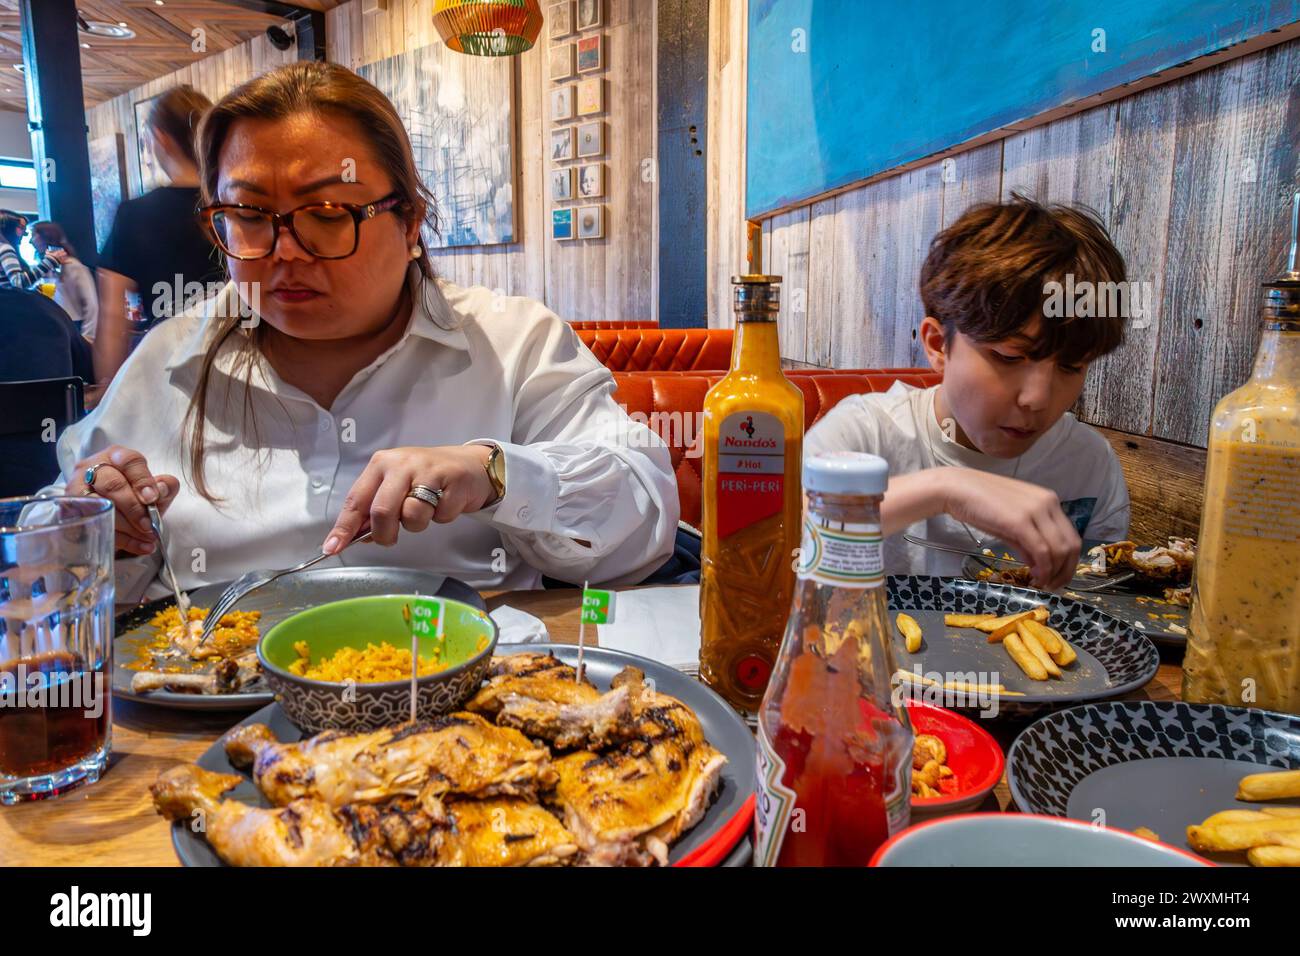 A mother and son eat grilled chicken together at a Nandos restaurant Stock Photo